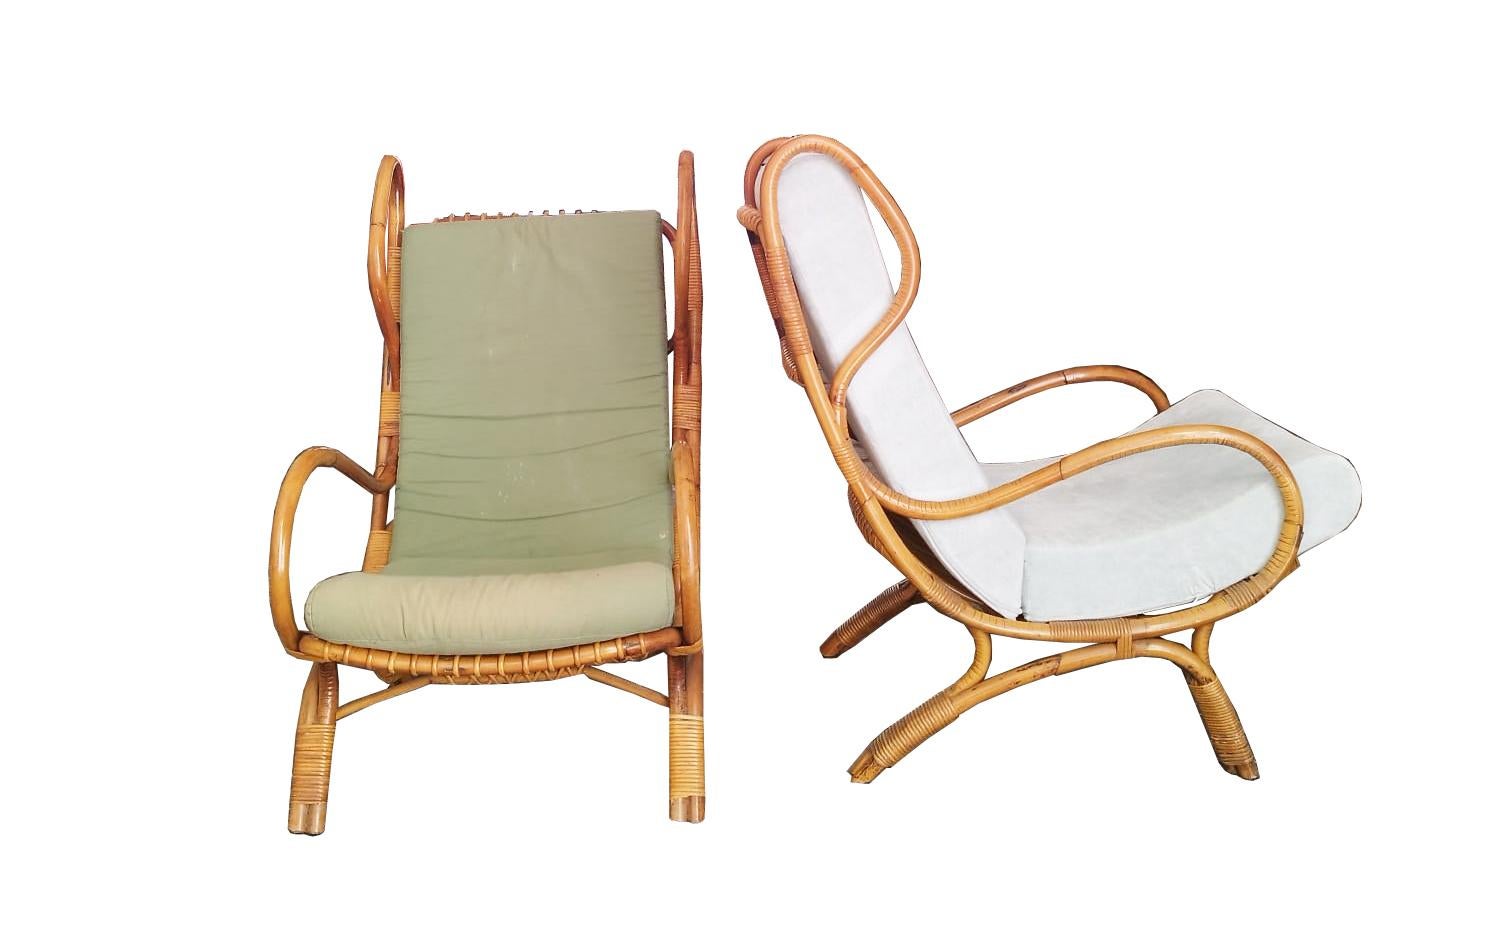 Rare bamboo 'Continuum' lounge chairs model BP16 designed by Gio Ponti, manufactured by Bonacinao. The chair is completely made of bamboo and wicker and still has its original upholstery and cushion. The chair is in extraordinary condition and seats